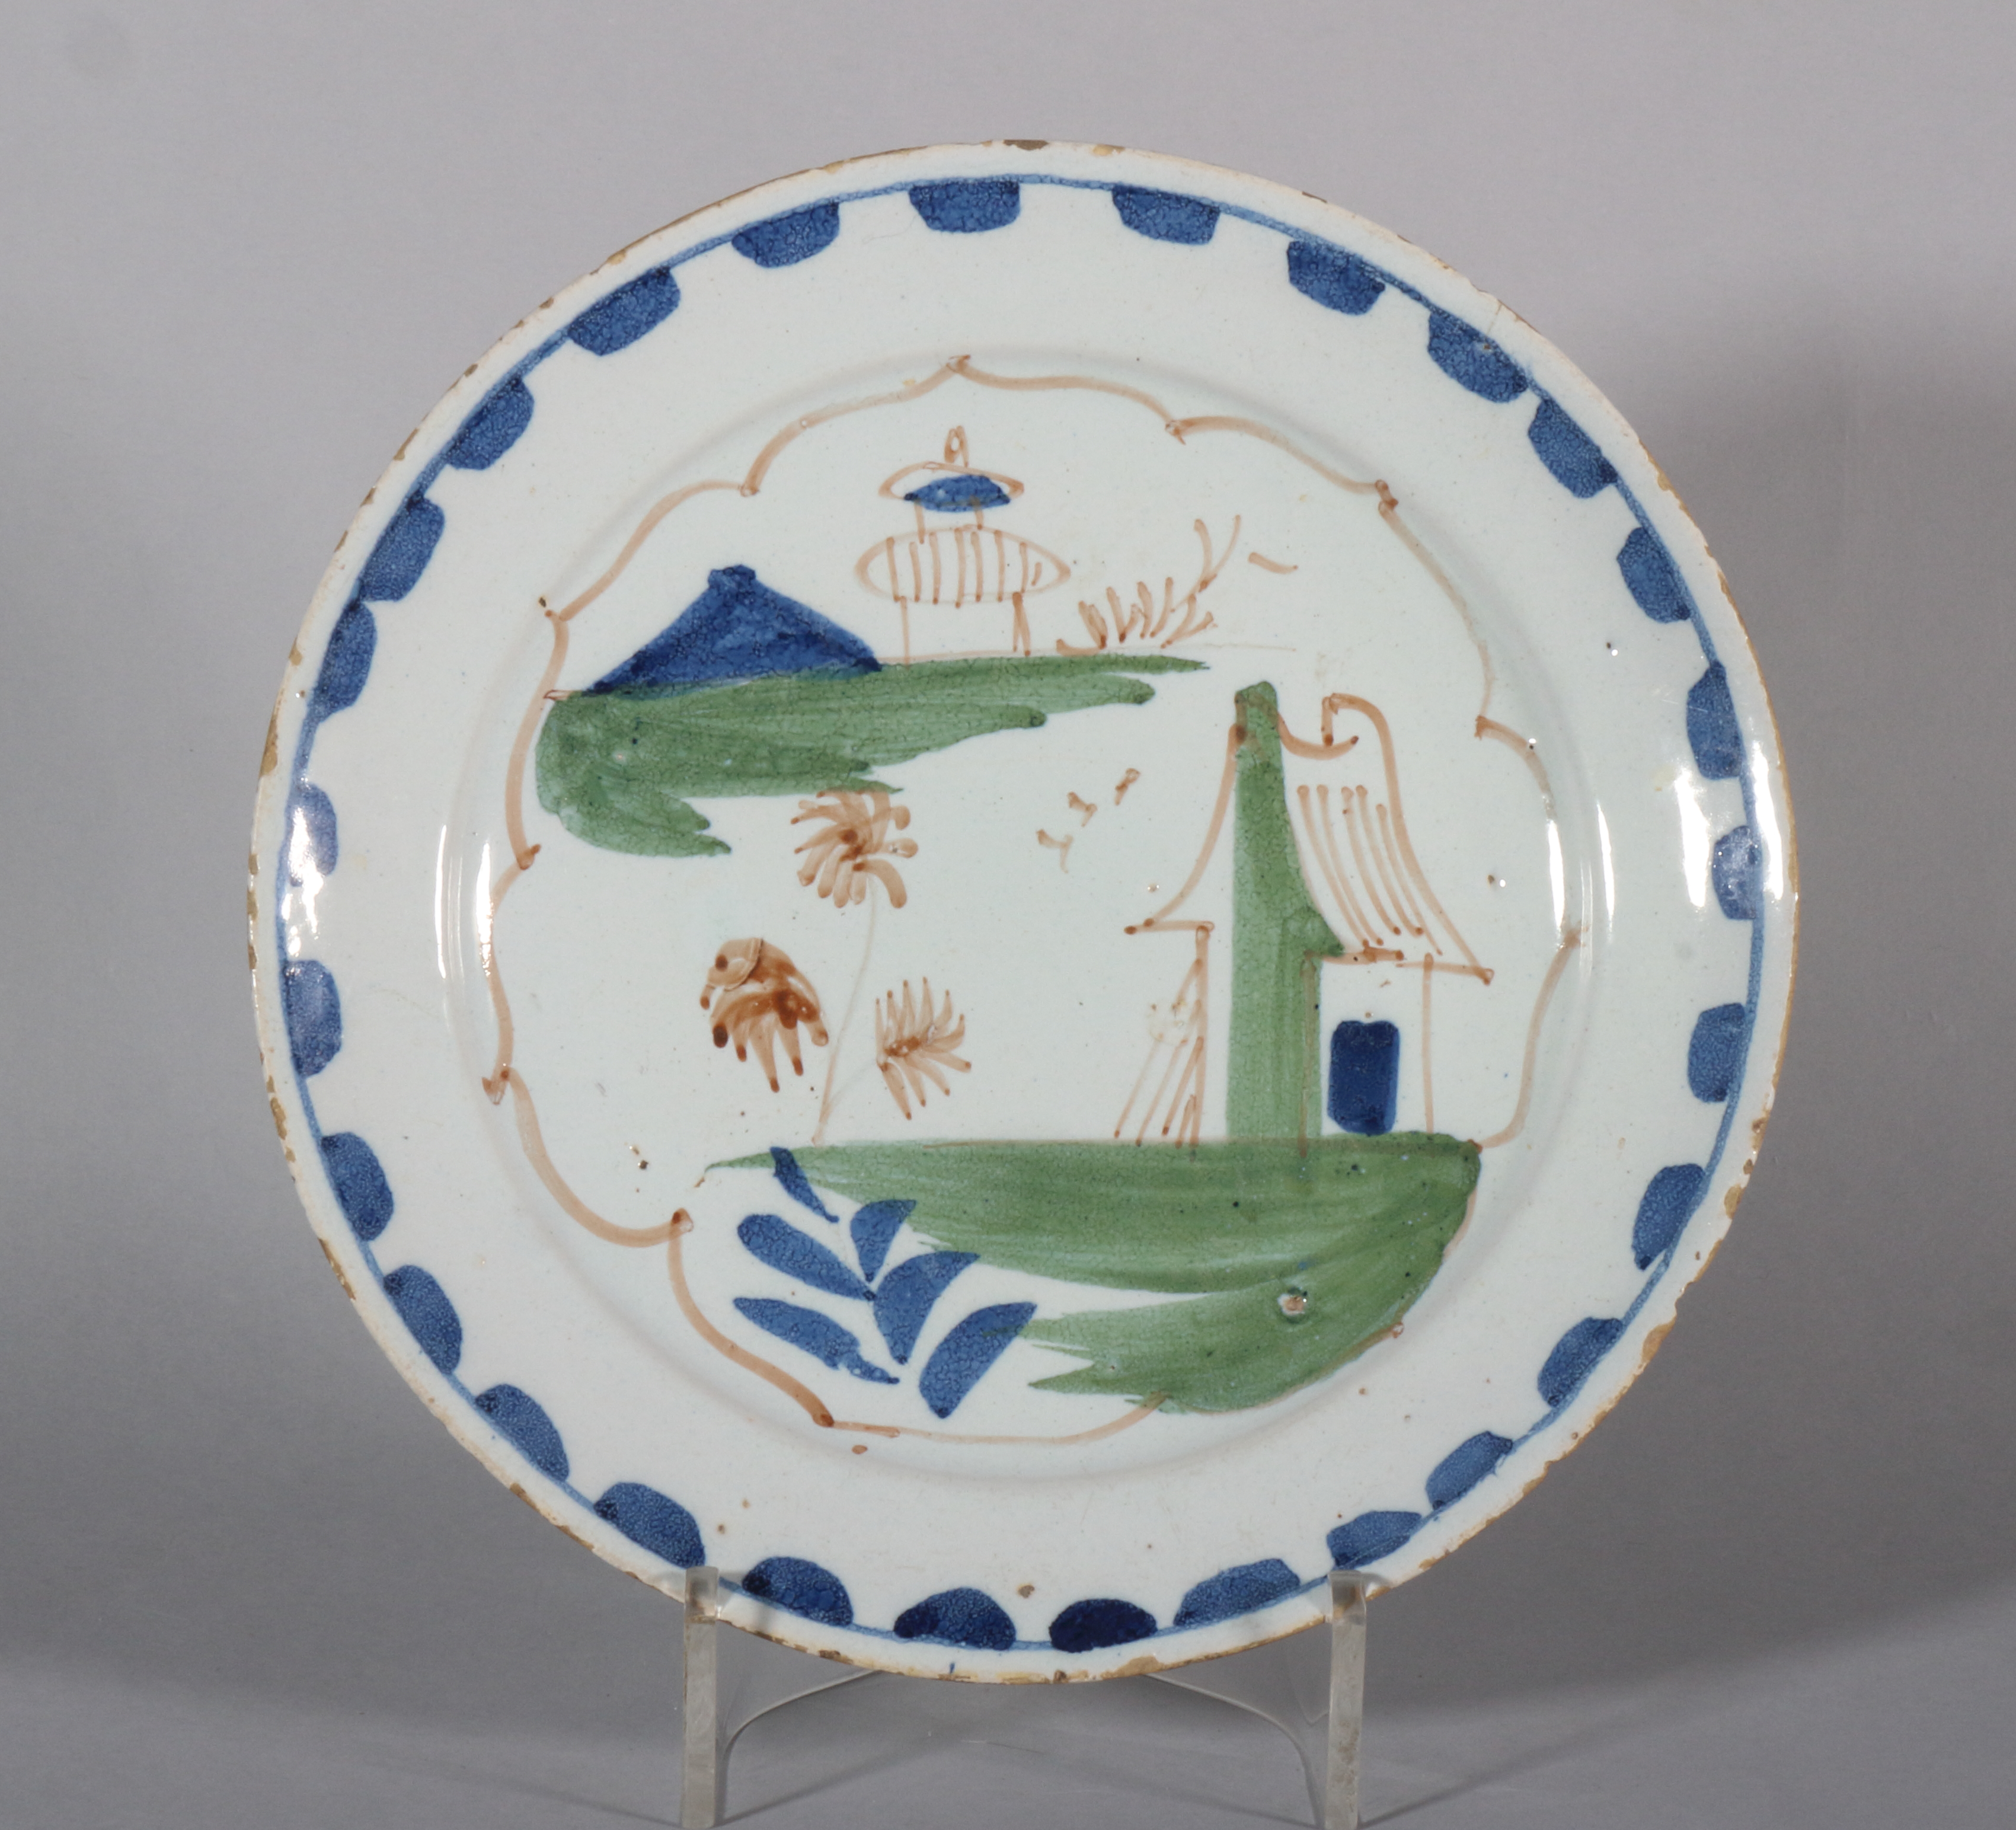 An 18th century Lambeth delft plate with simple landscape and blue dash border, 8 3/4" dia, 1740